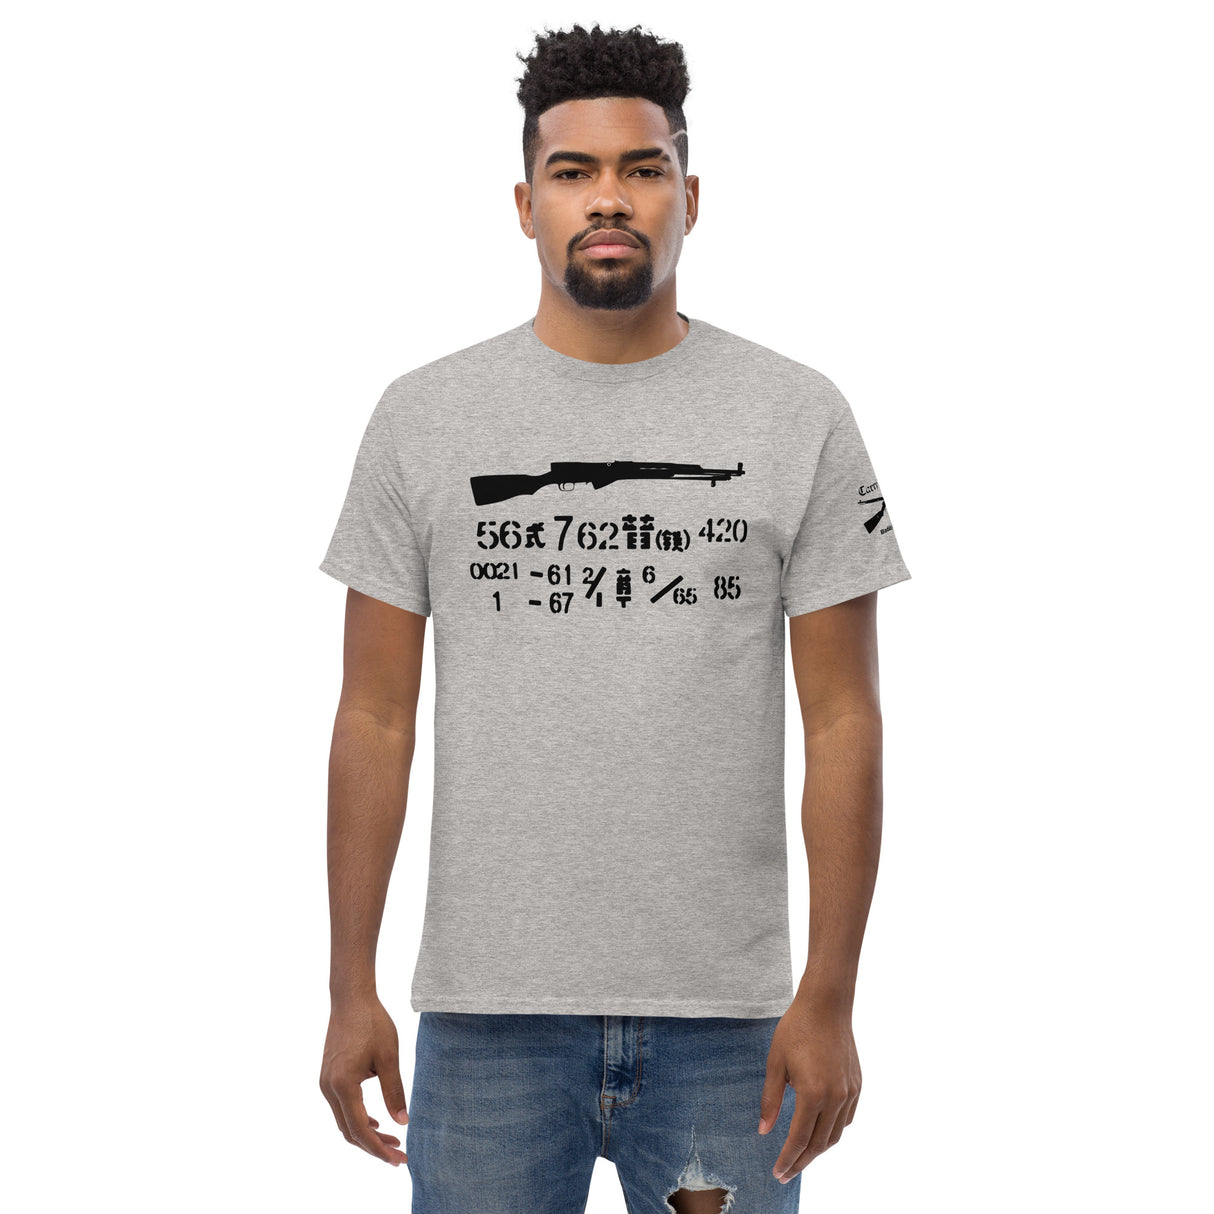 Type 56 SKS Chinese carbine cotton T-shirt with ammo spam can labels - dark font